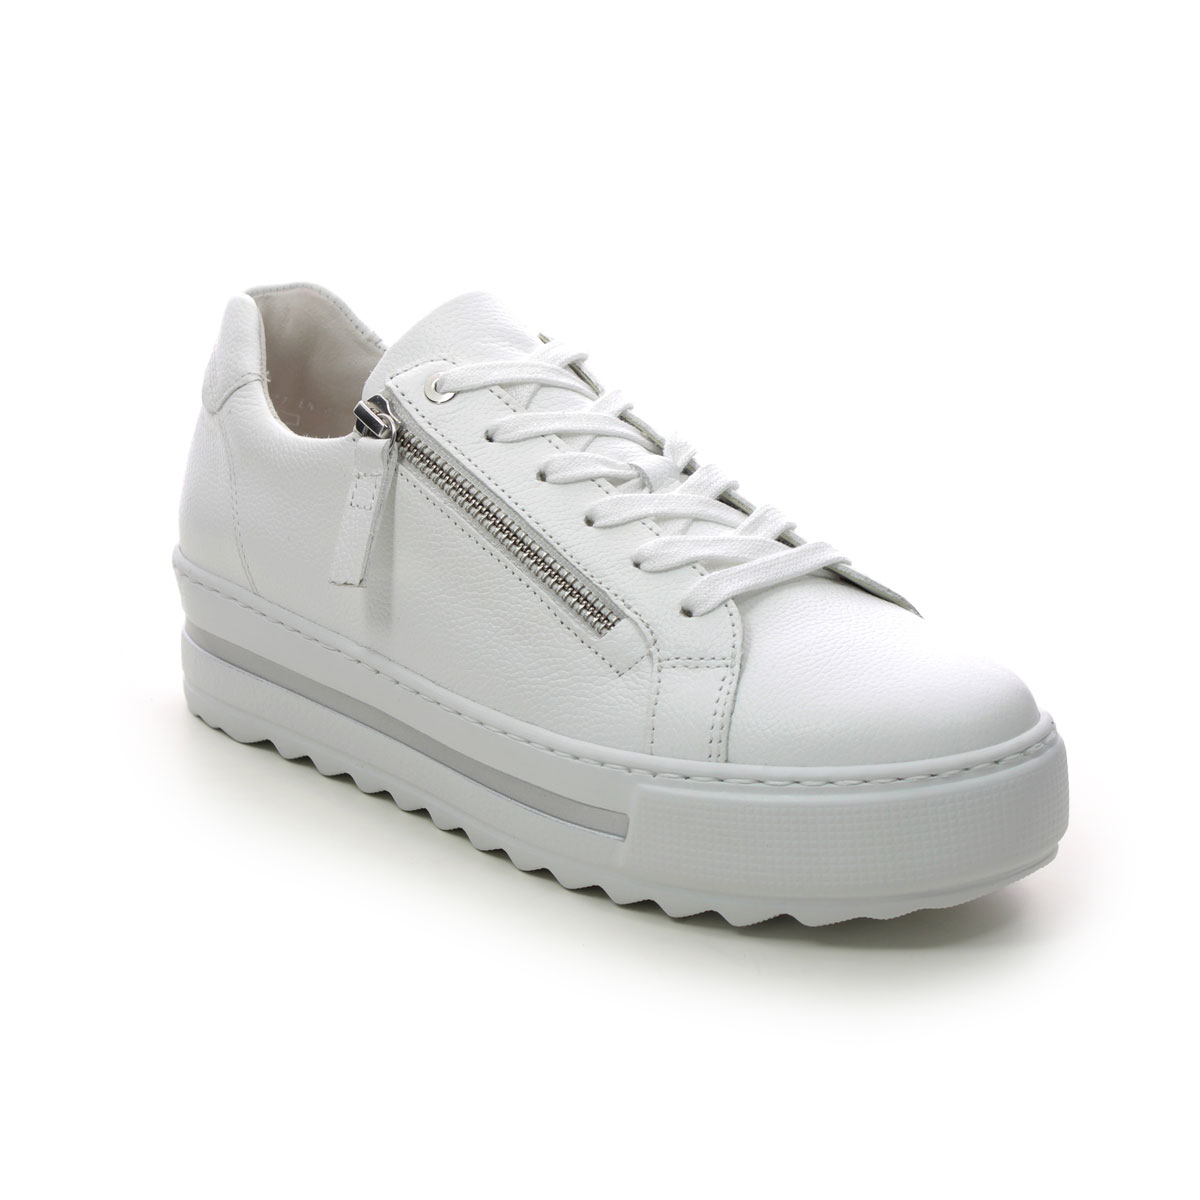 Gabor Heather WHITE LEATHER Womens trainers 26.498.50 in a Plain Leather in Size 5.5